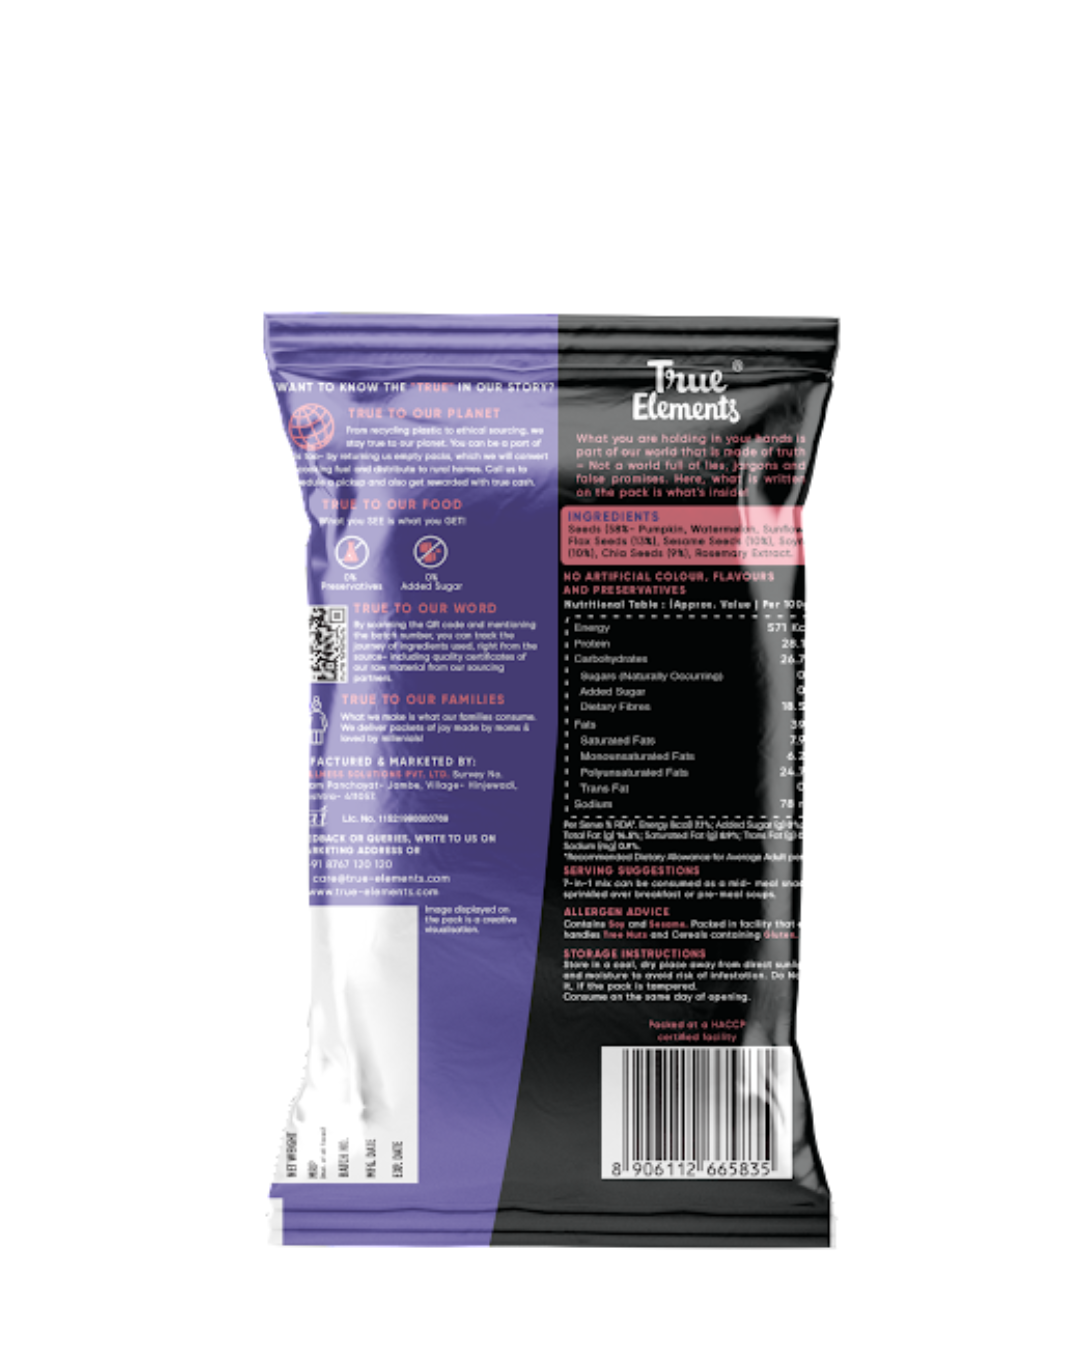 7 in 1 mix 30g ingredients and nutrition value